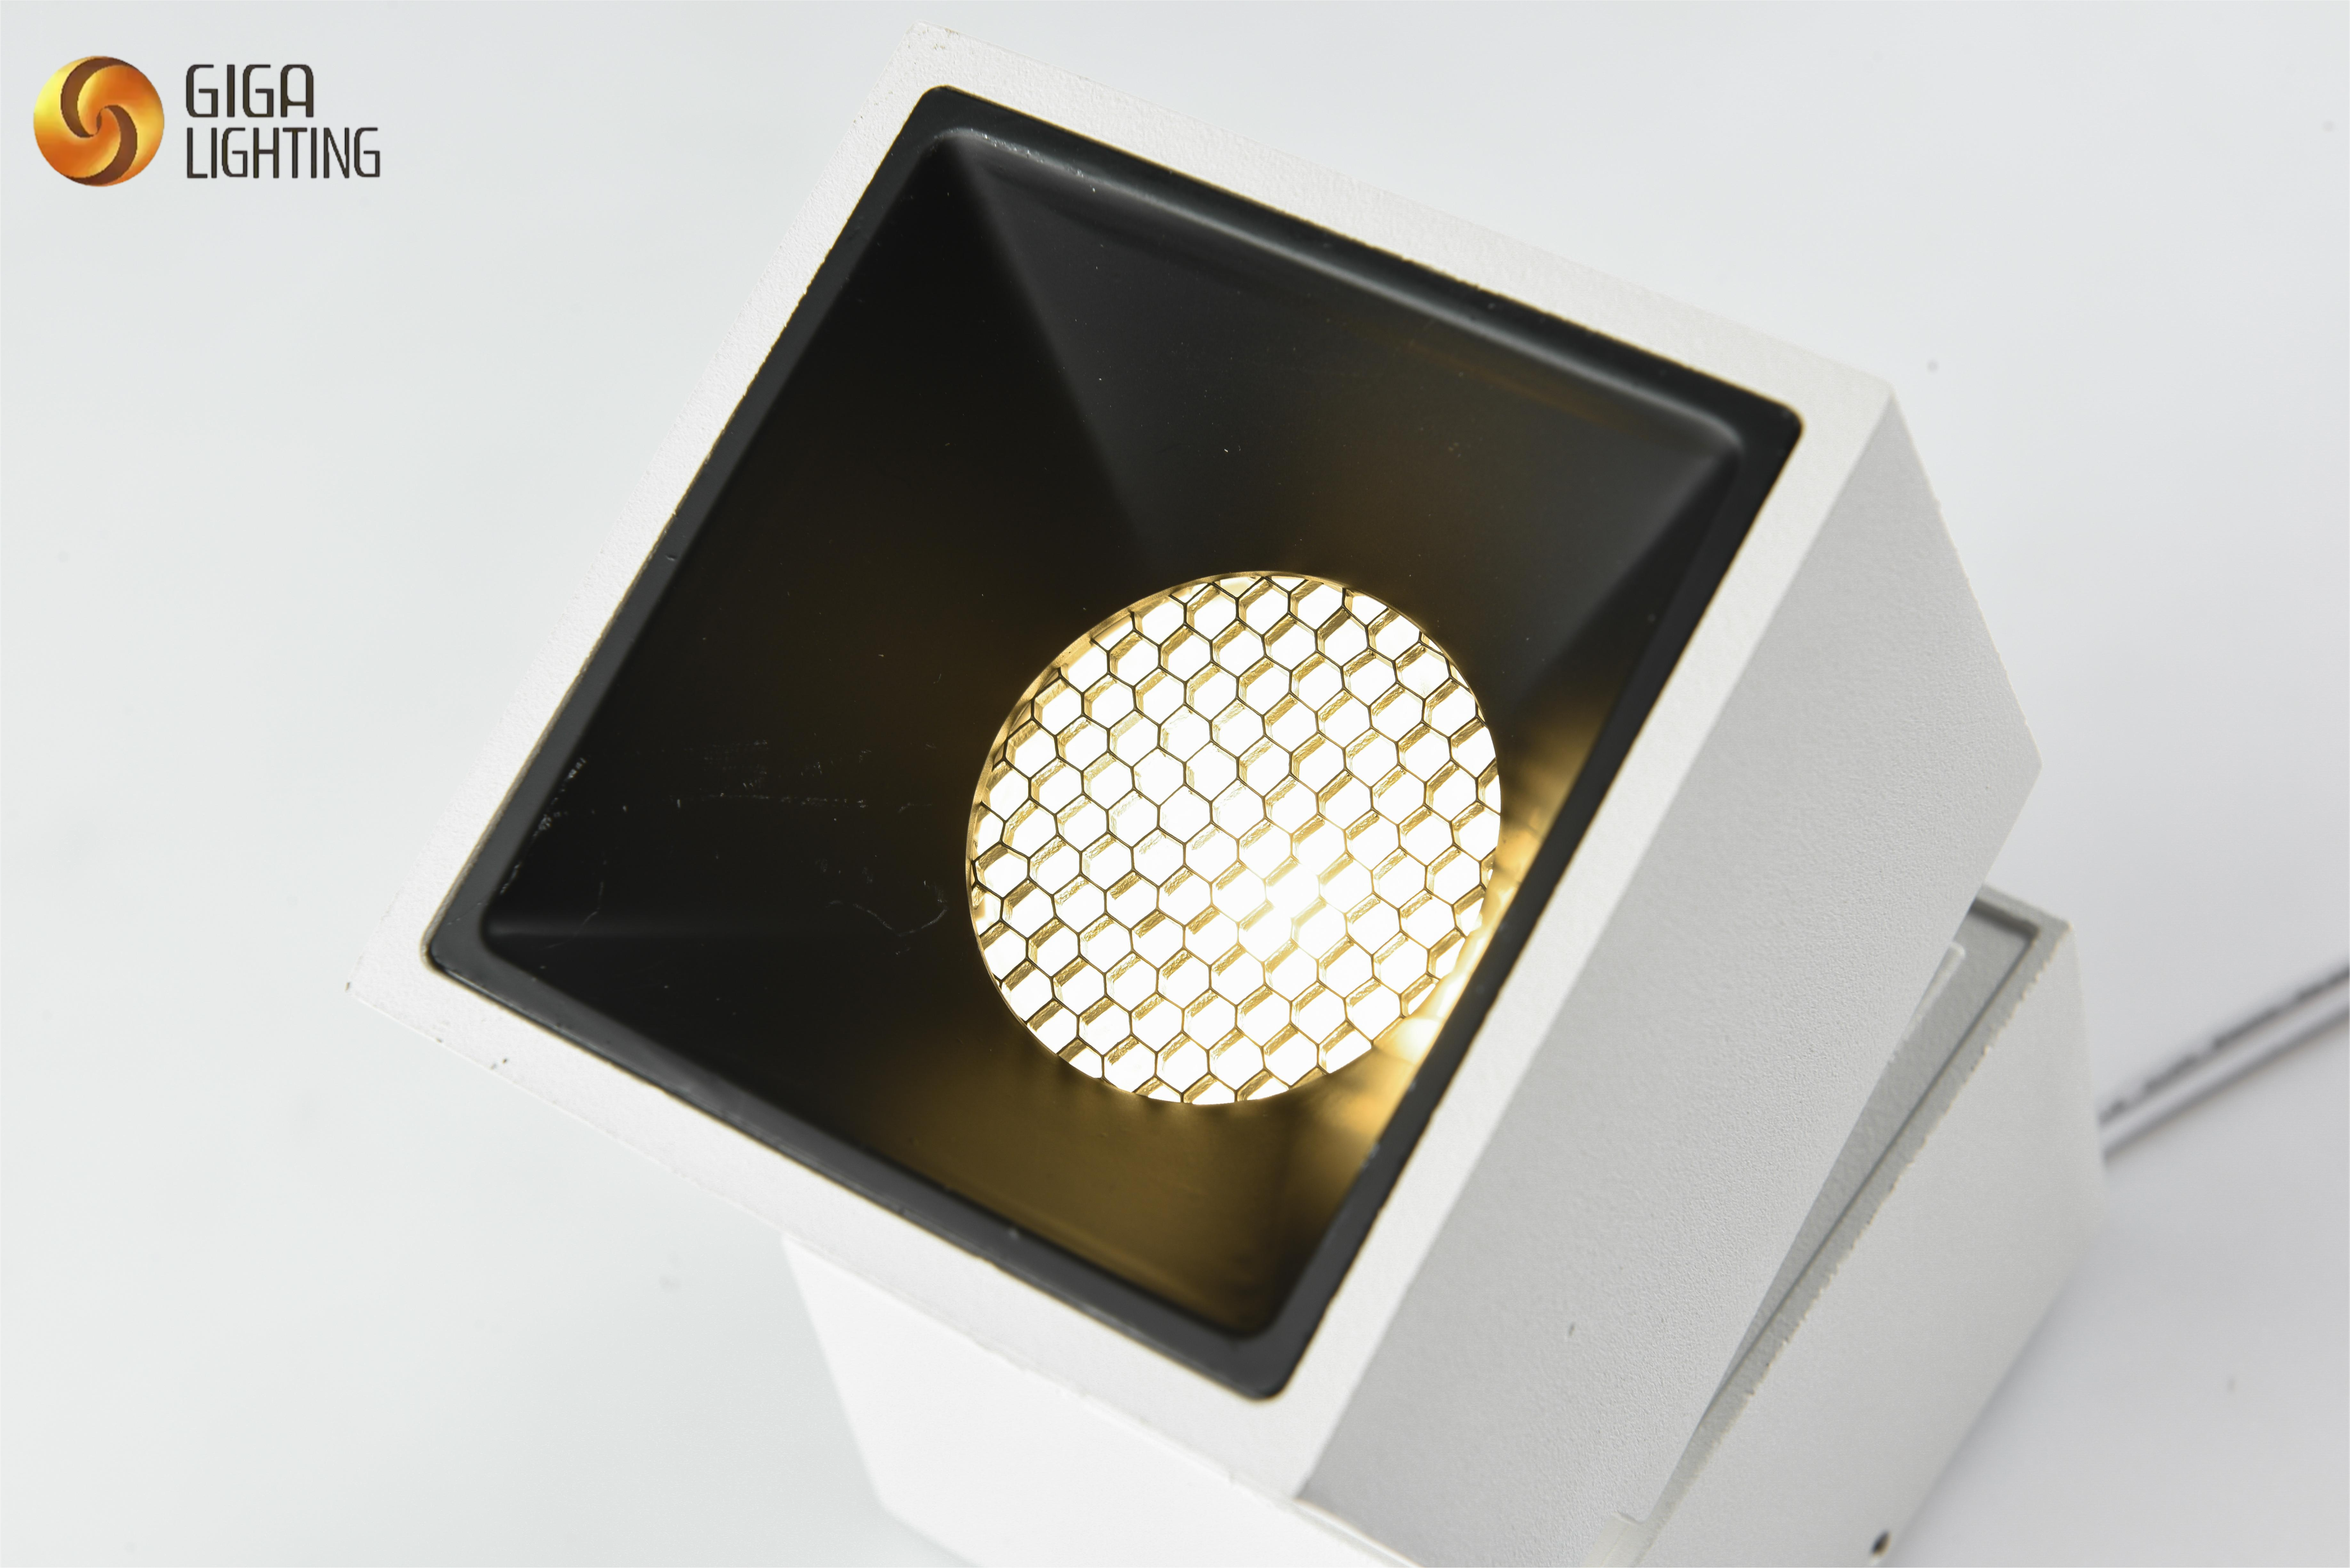 square led Spotlights adjustable Tailored Excellence: Illuminate with Confidence using Our Ceiling-Mounted LED Spotlights – A Testament to Quality Manufacturing and Dedicated Service